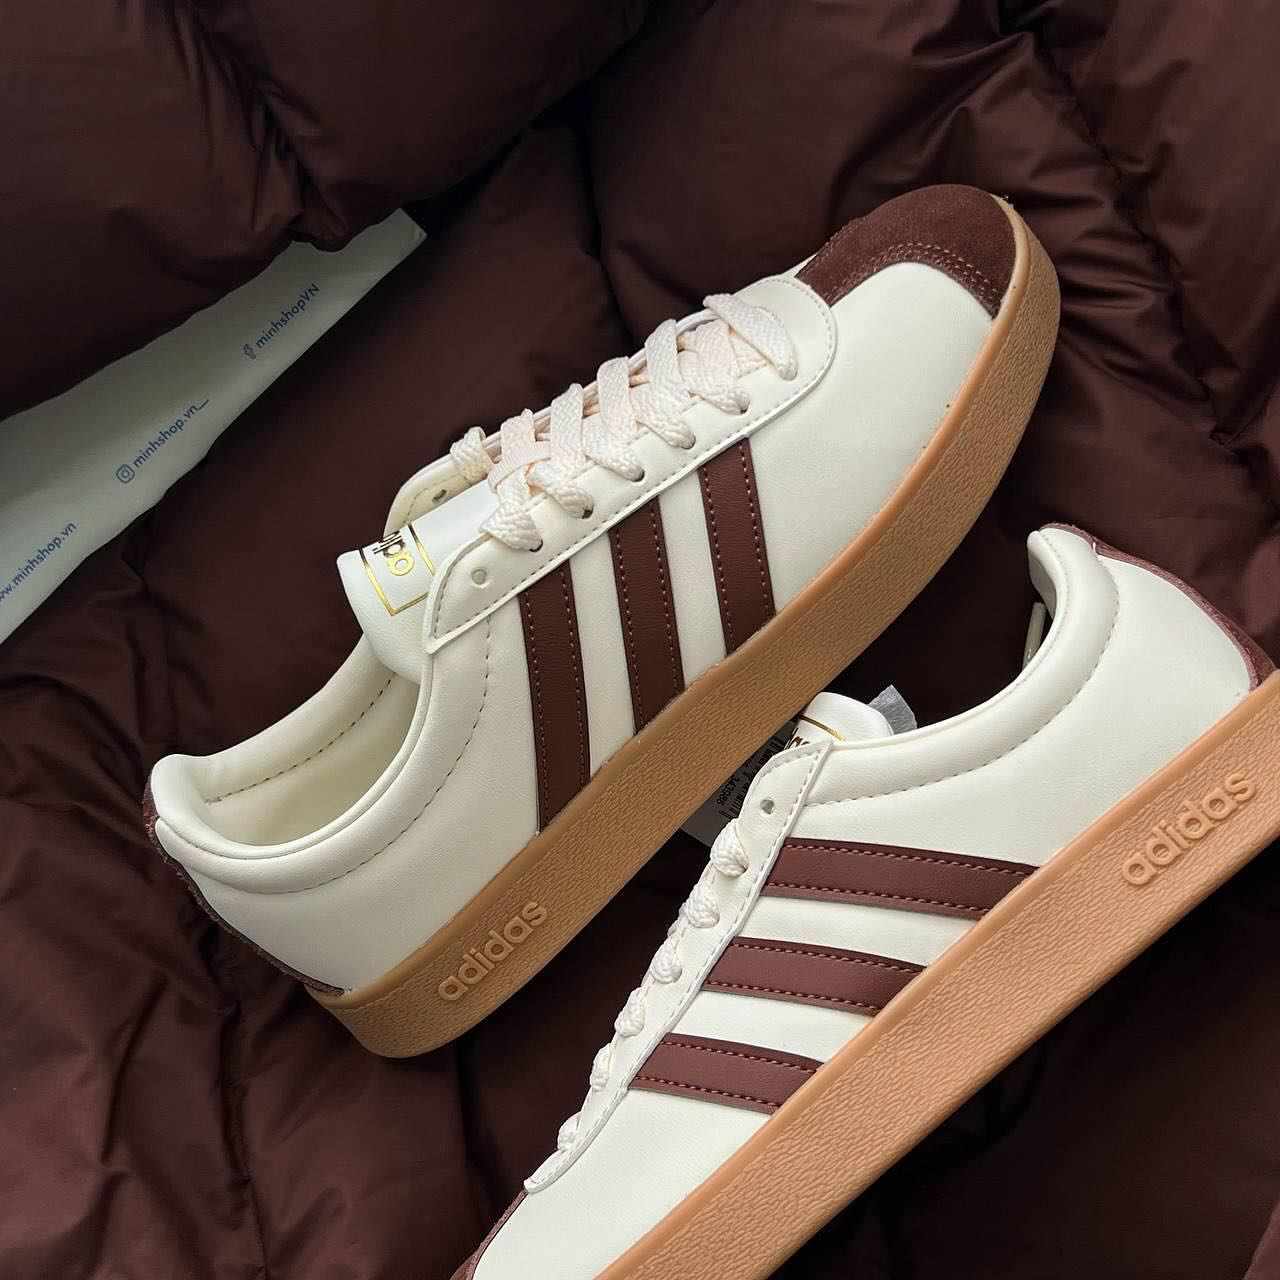 adidas' VL Court 2.0 sneaker in a white and brown colorway